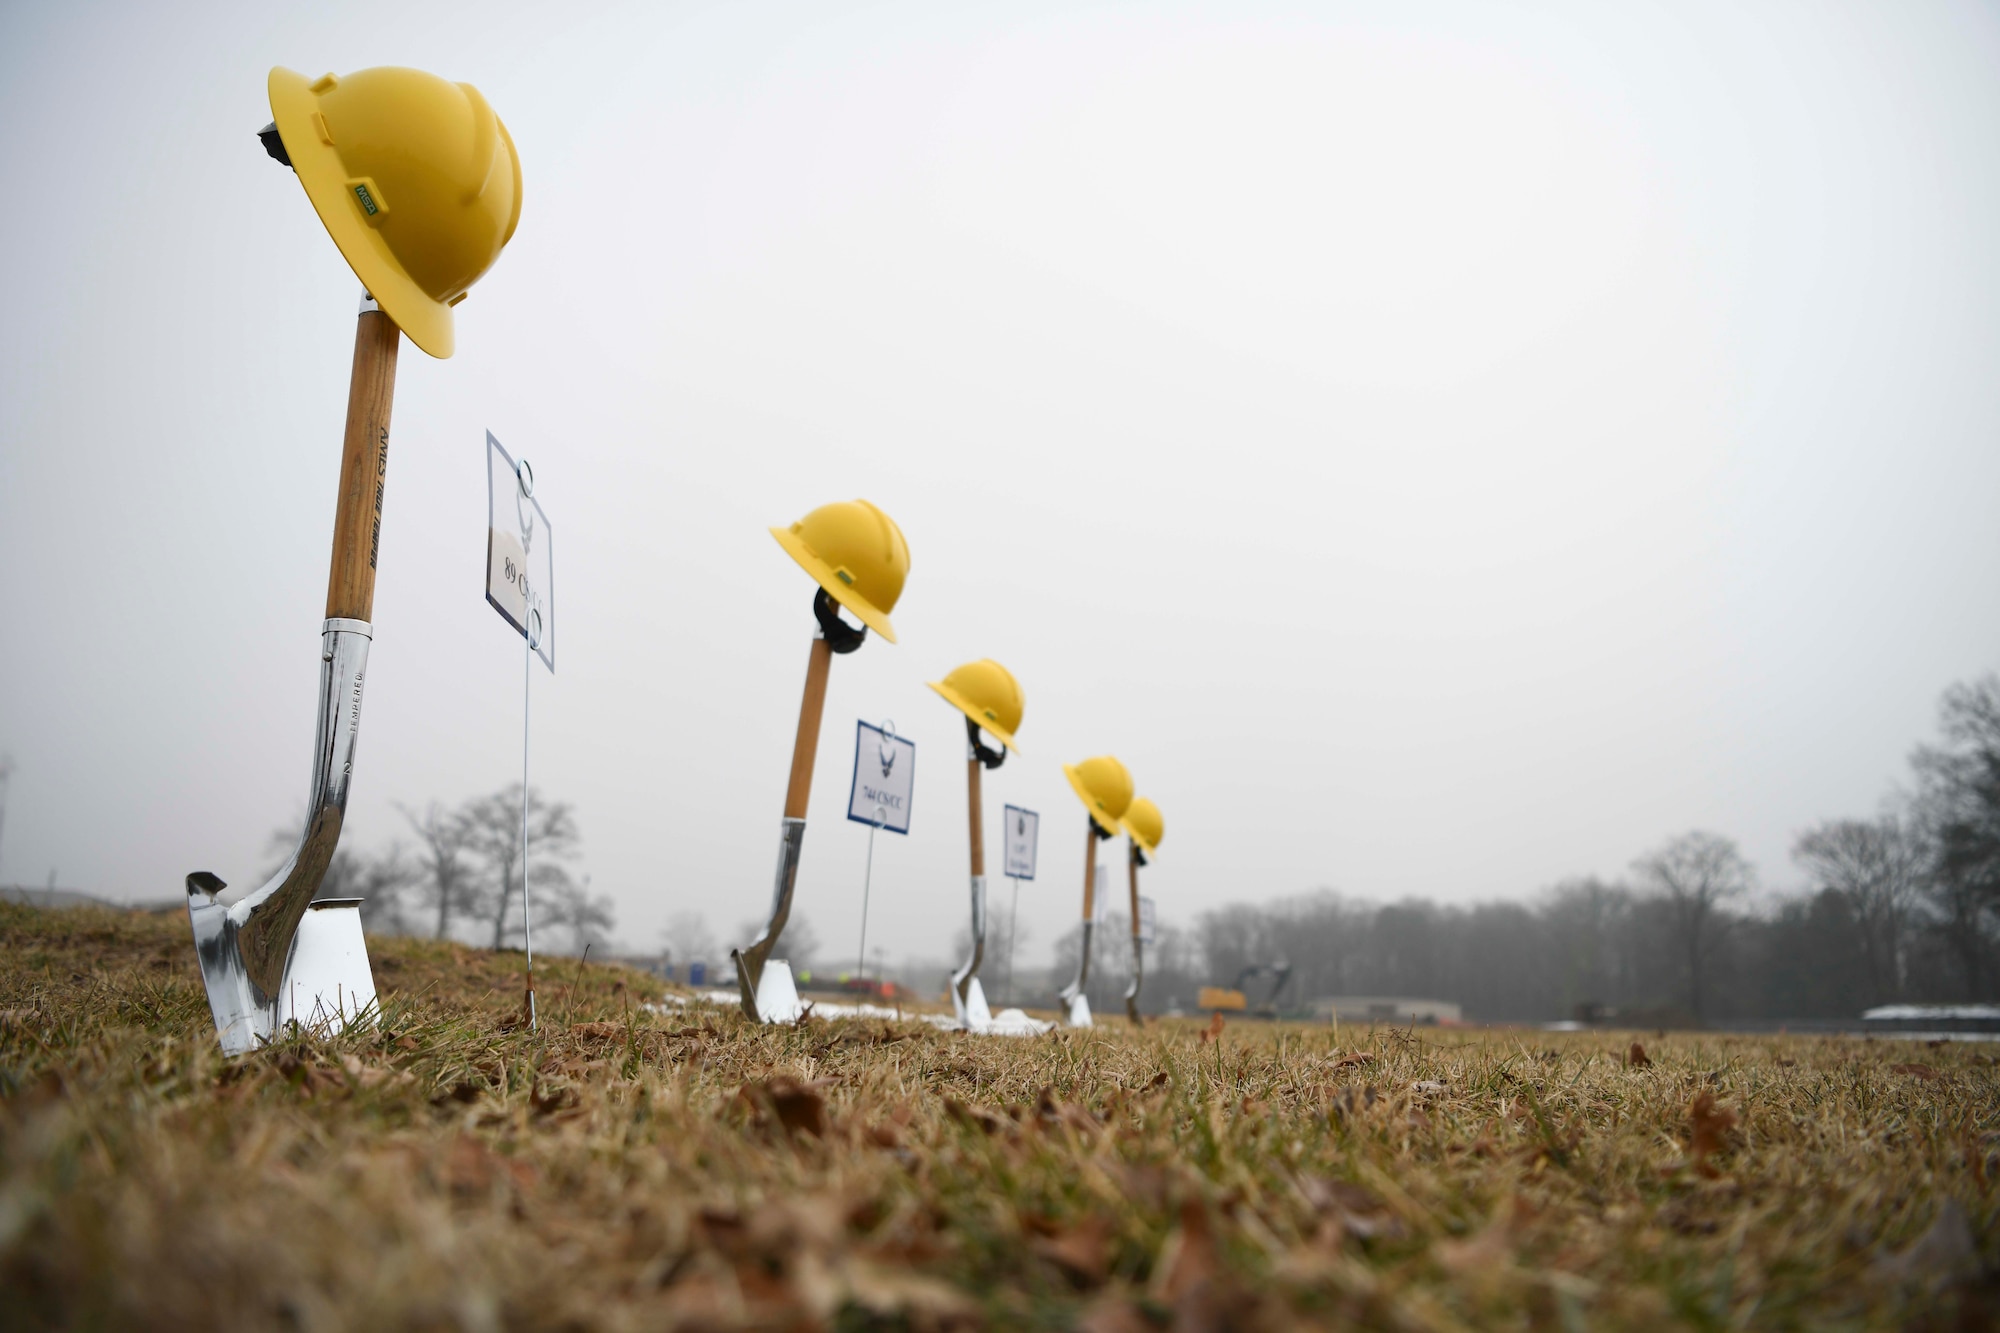 Shovels rest in the dirt prior to a groundbreaking ceremony at Joint Base Andrews, Md., Feb. 2, 2022.